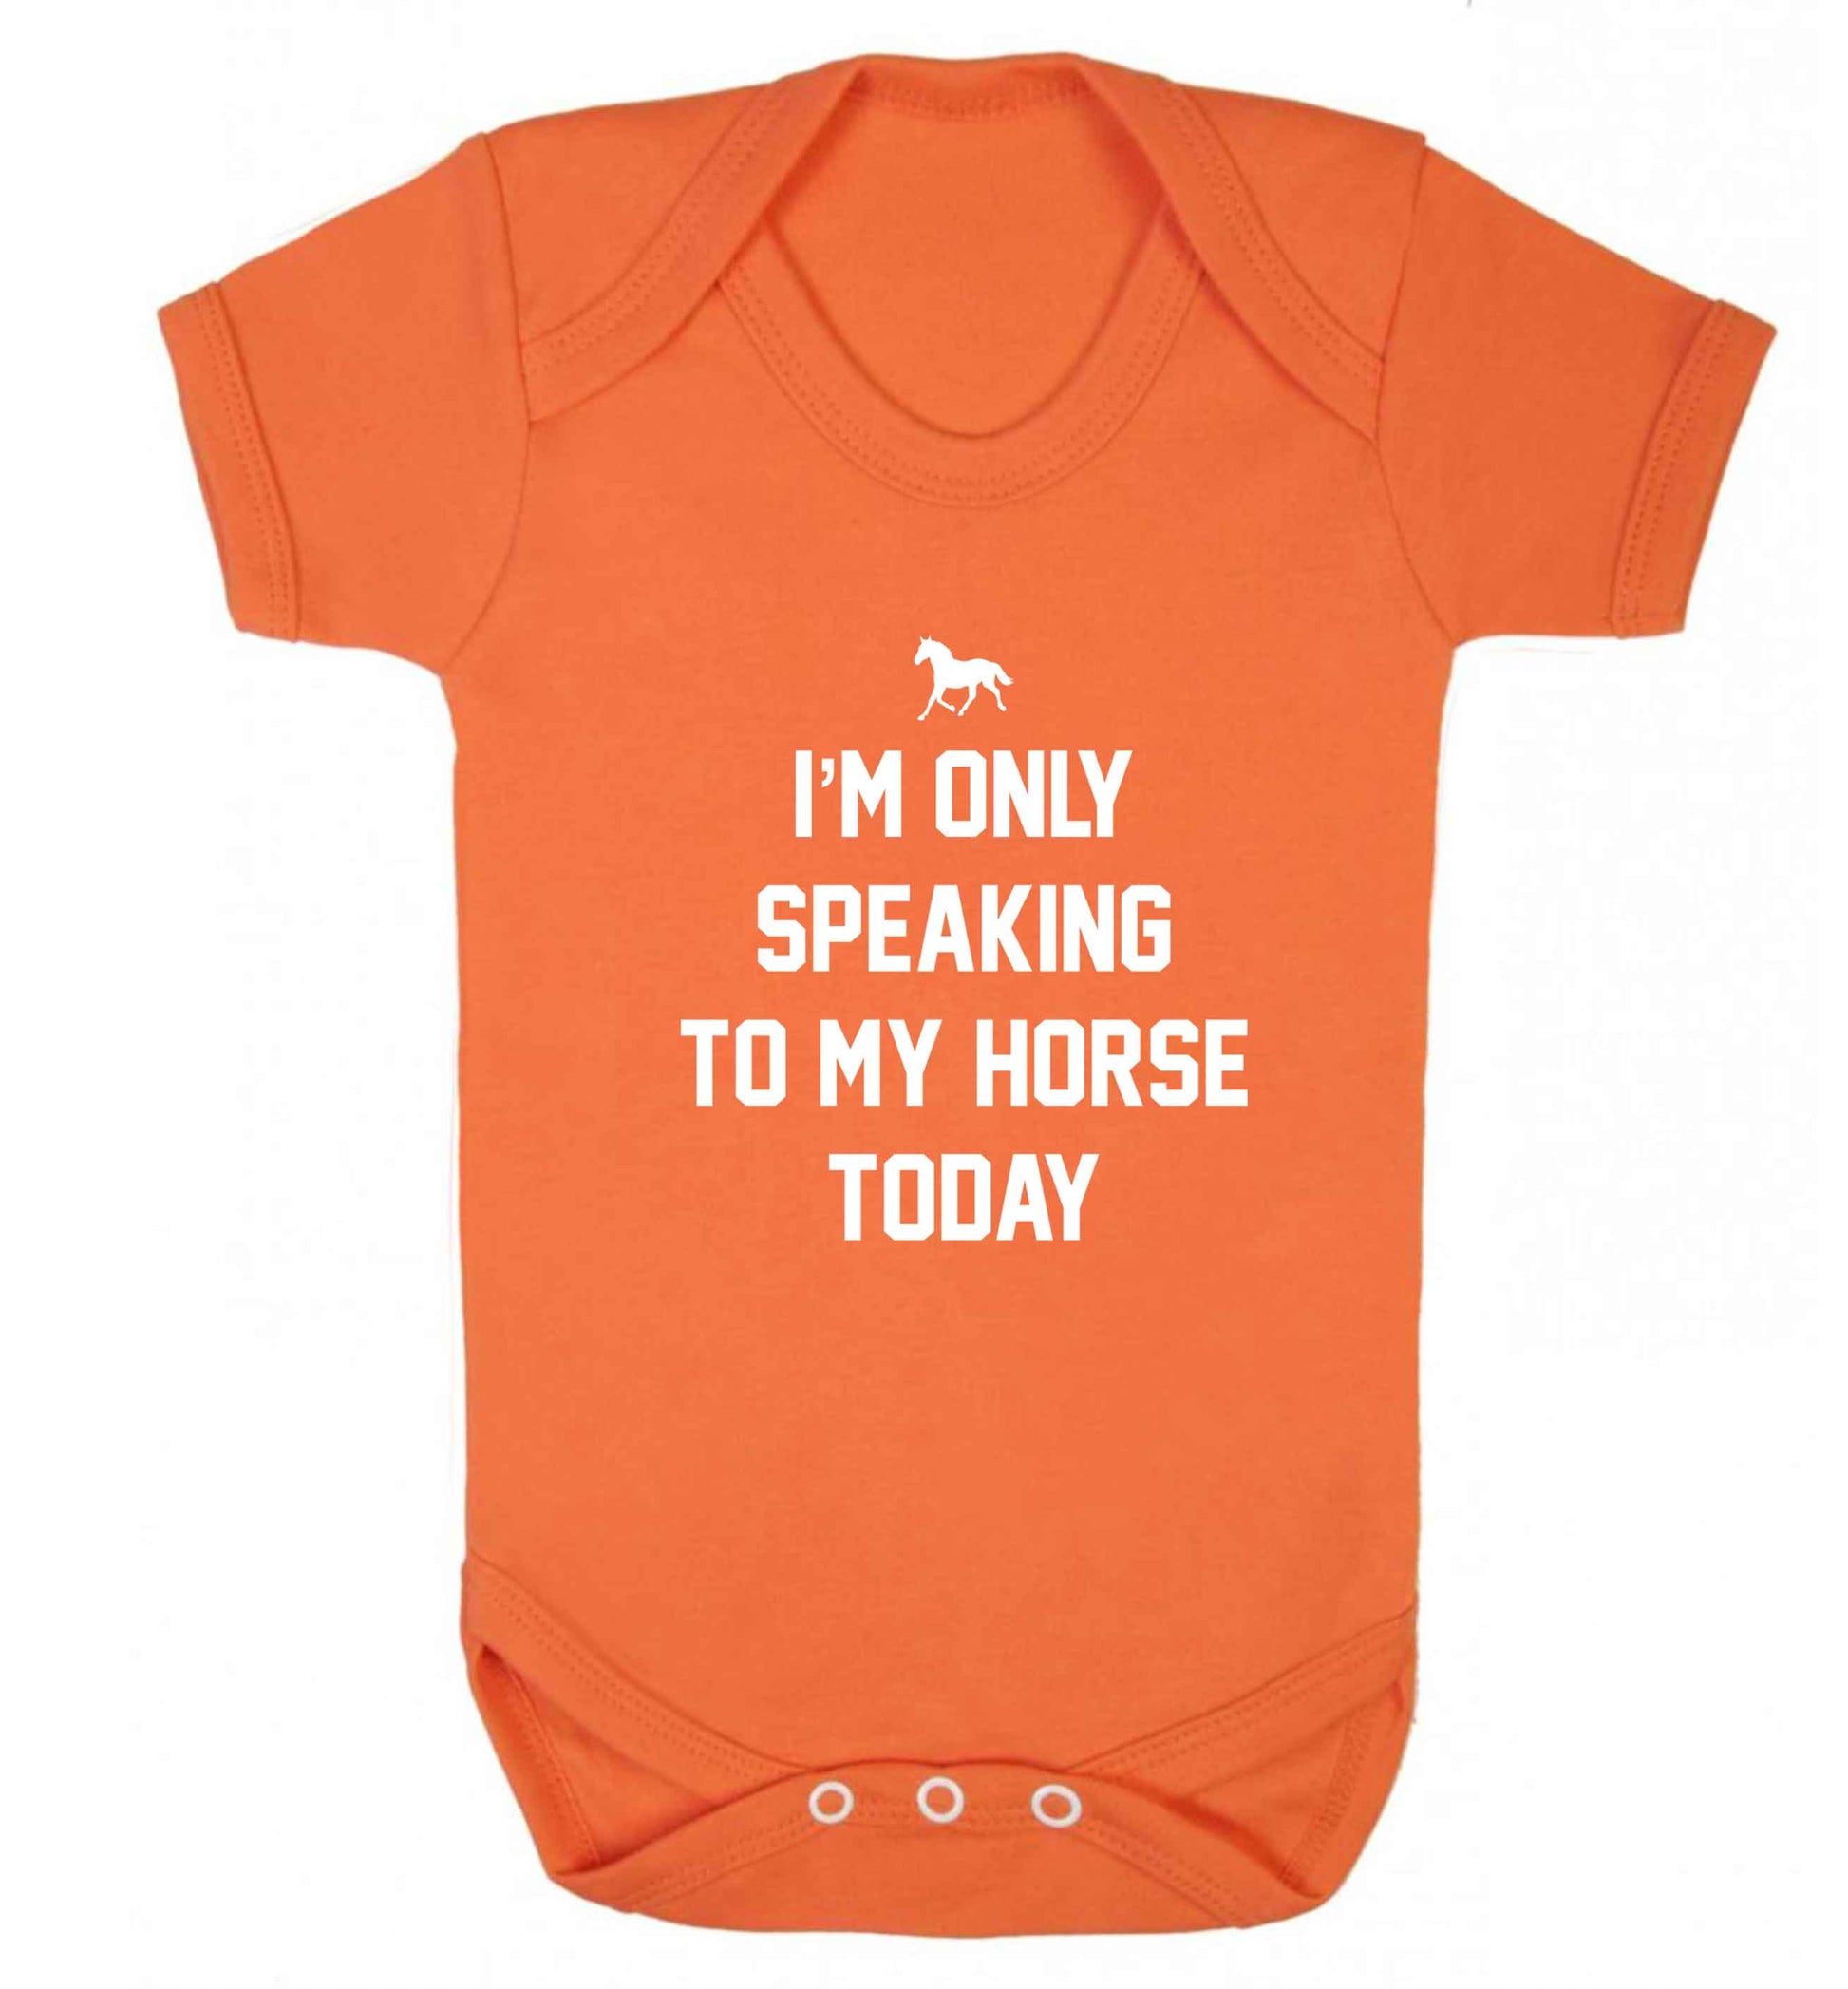 I'm only speaking to my horse today baby vest orange 18-24 months